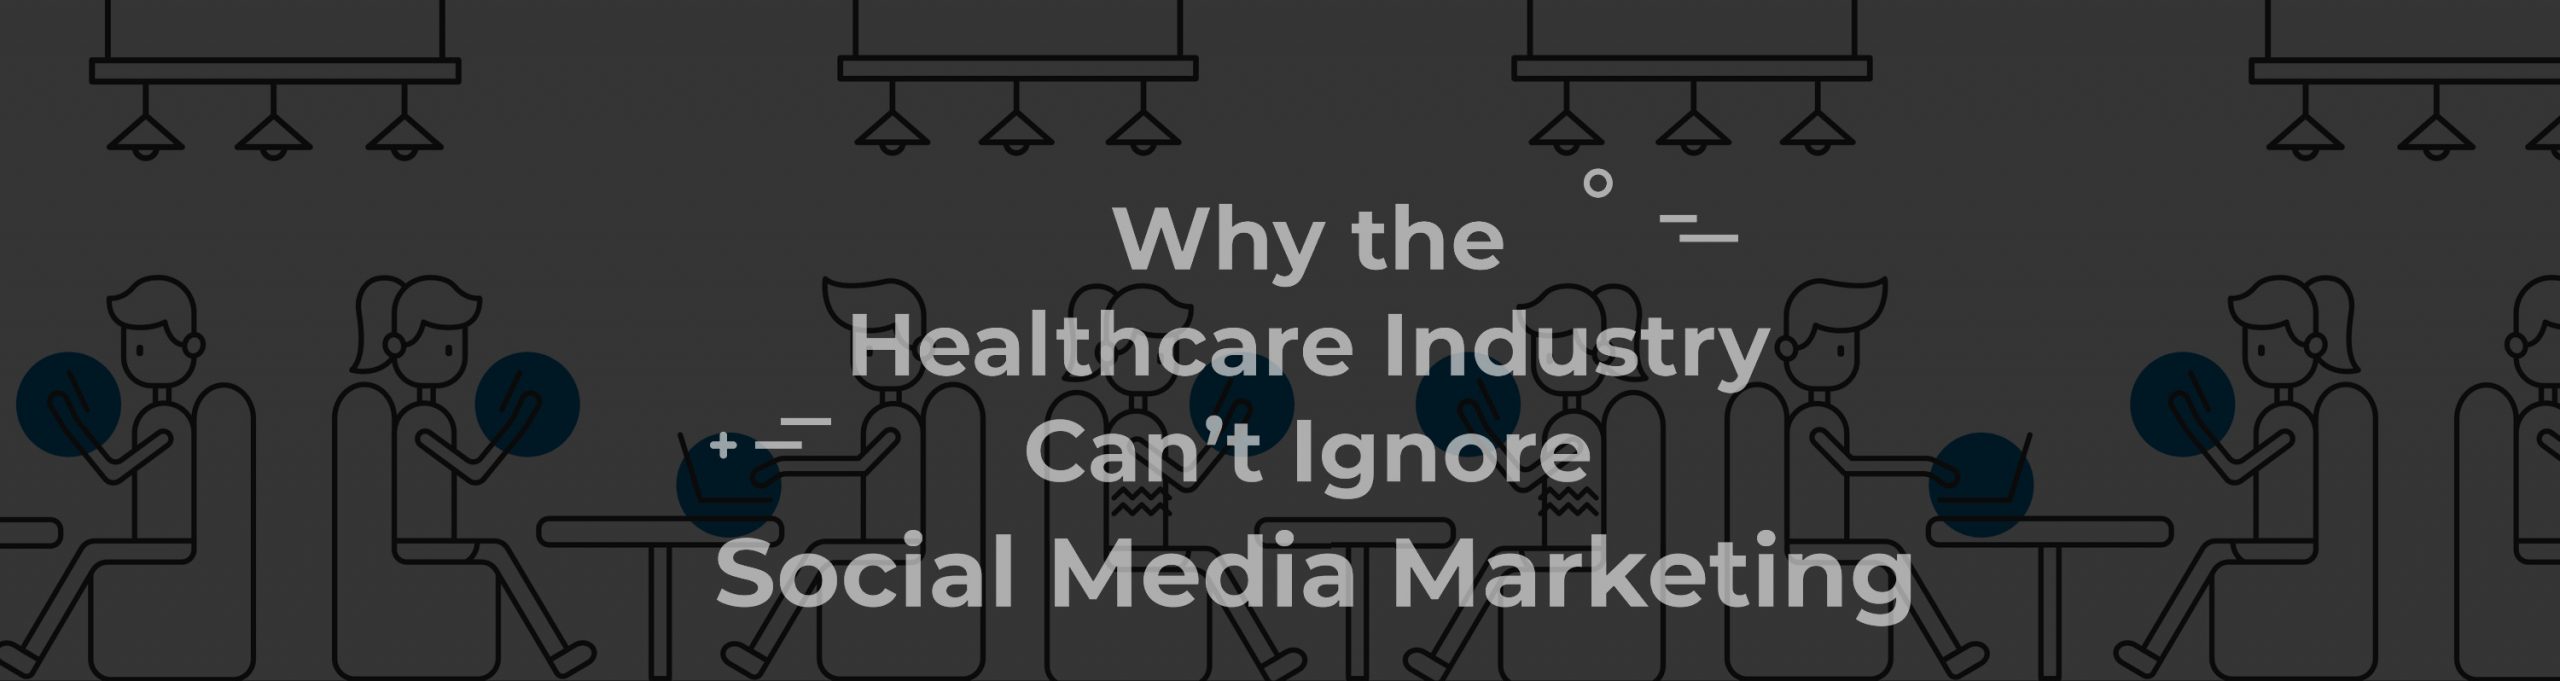 Healthcare Industry Can’t Ignore Social Media Marketing